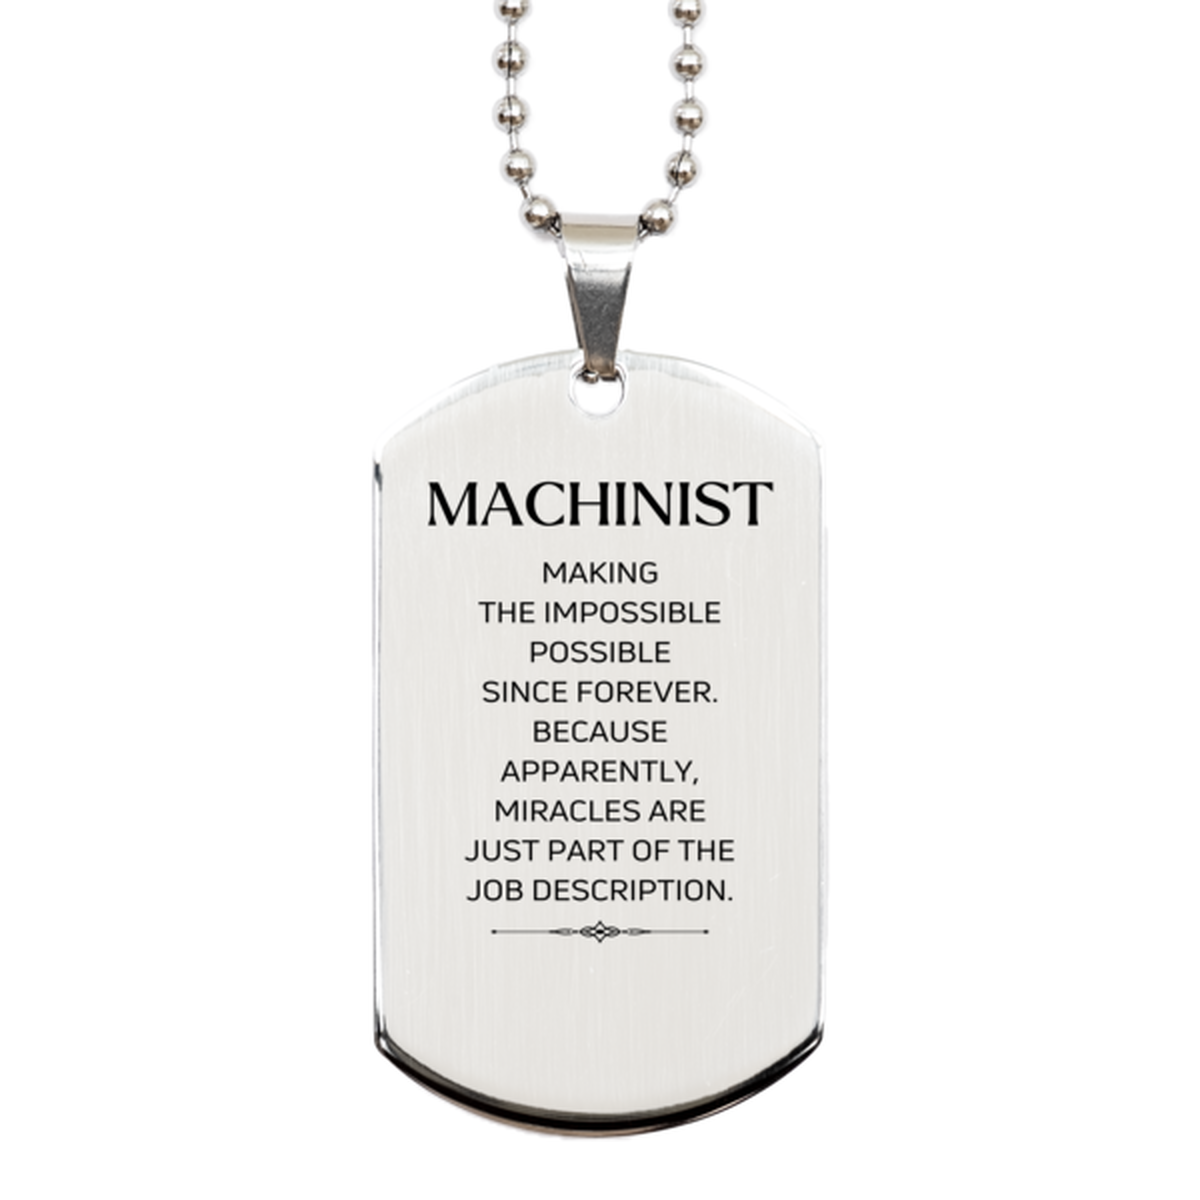 Funny Machinist Gifts, Miracles are just part of the job description, Inspirational Birthday Silver Dog Tag For Machinist, Men, Women, Coworkers, Friends, Boss